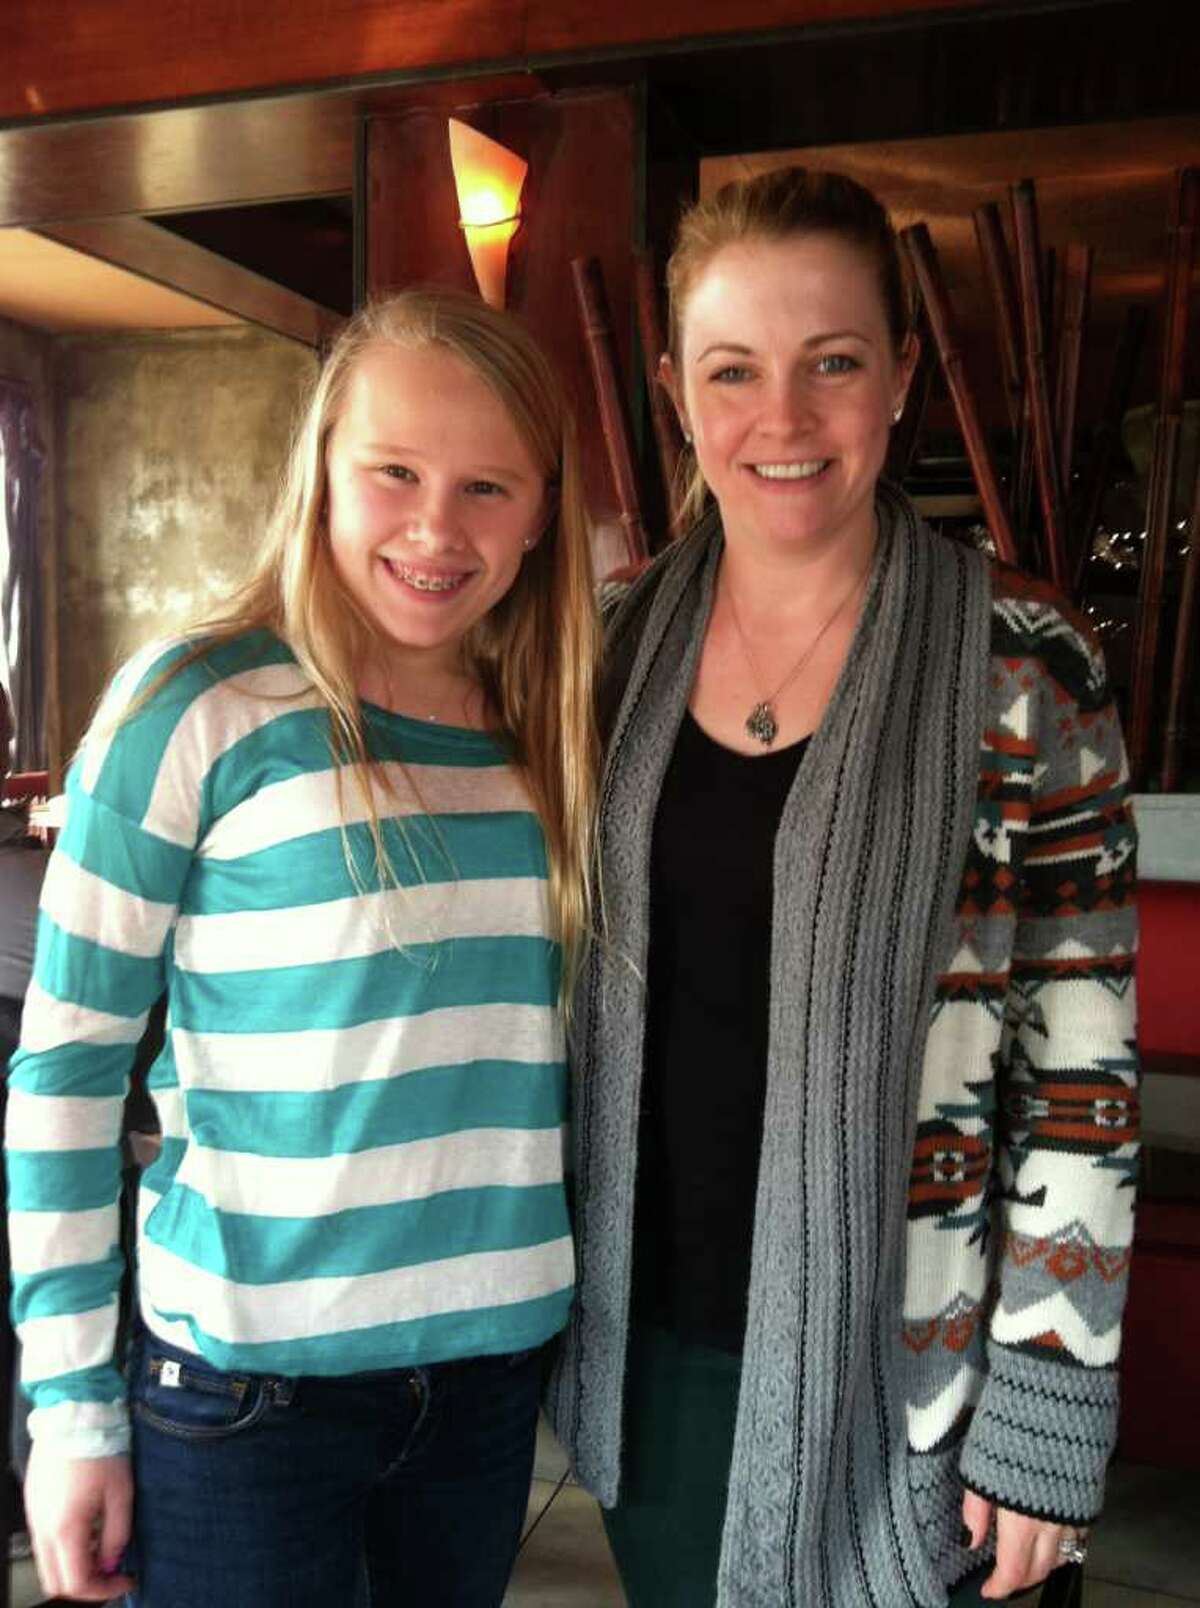 Actress Melissa Joan Hart, right, took time to chat with Greenwich resident Annie Standfest while having lunch at Tengda Asian Bistro in Greenwich last week.